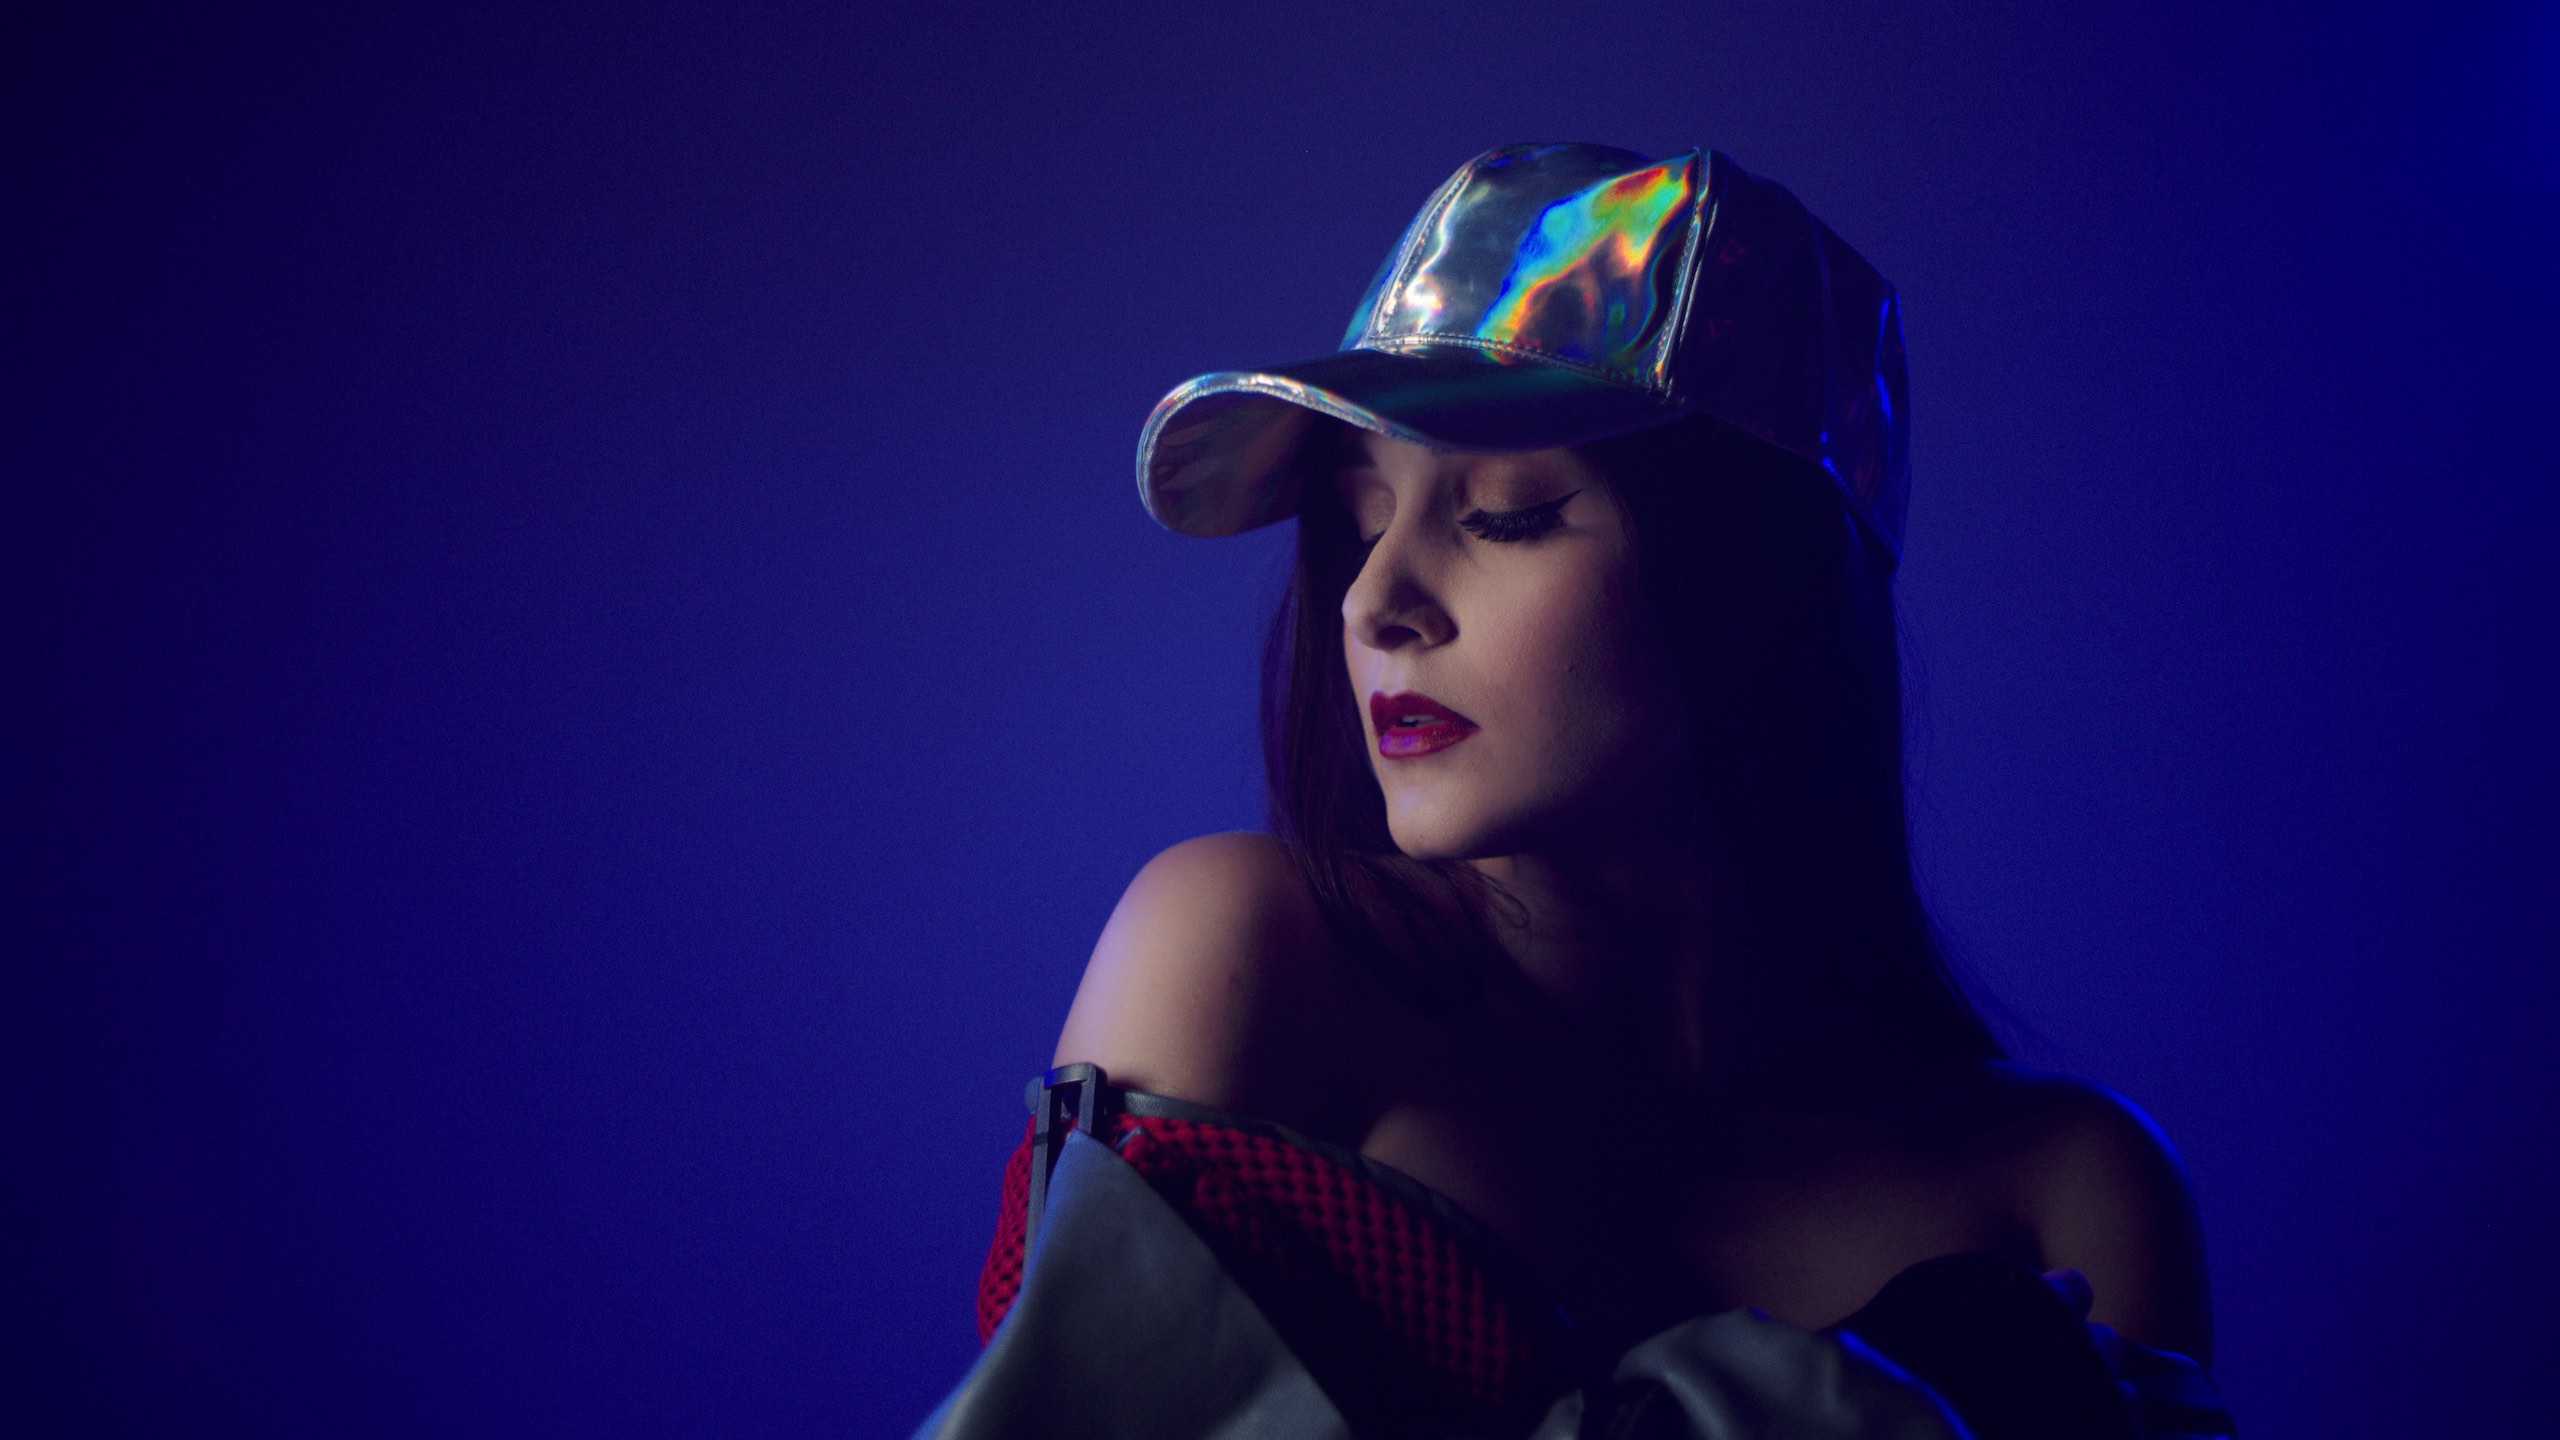 The Delorean Uncreative Music Woman with long hair wearing a multicolored cap, red and gray jacket and bright red lipstick headshot